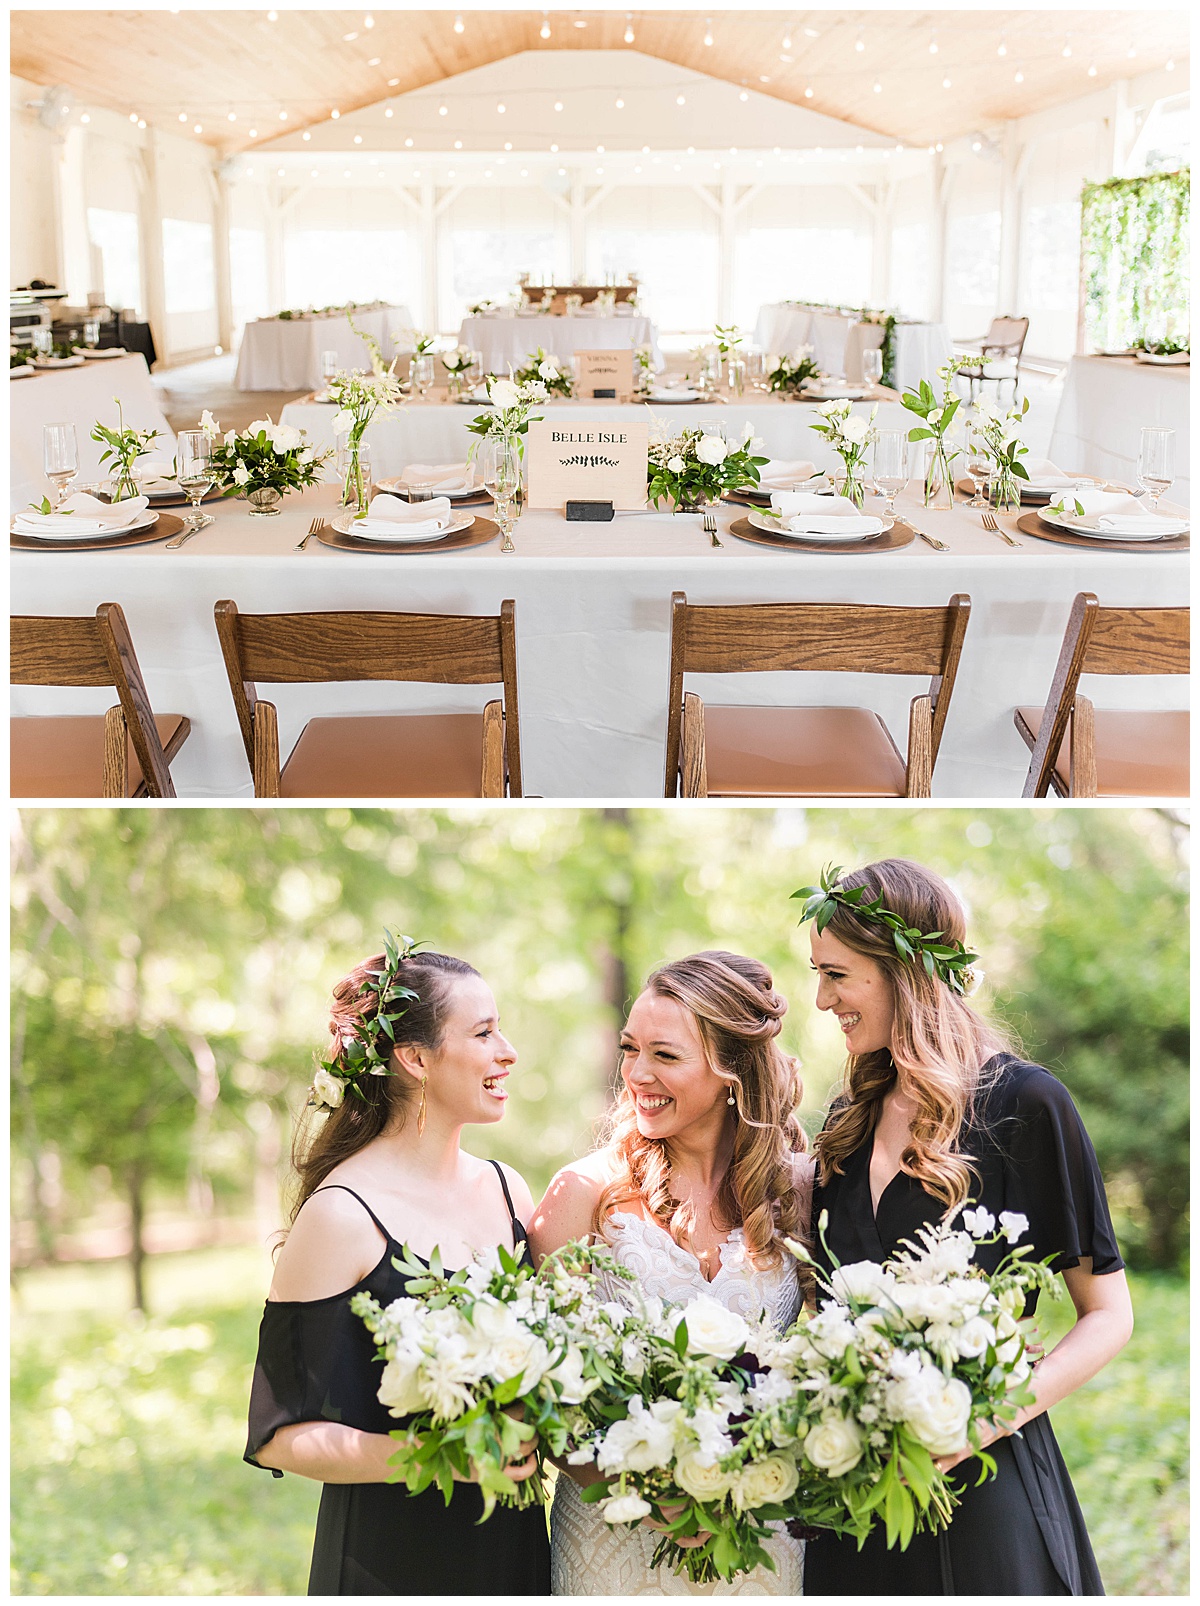 Seven Springs Farm Wedding: Greenery and Wood Grain, Bridal Portrait and Table Setting wedding details